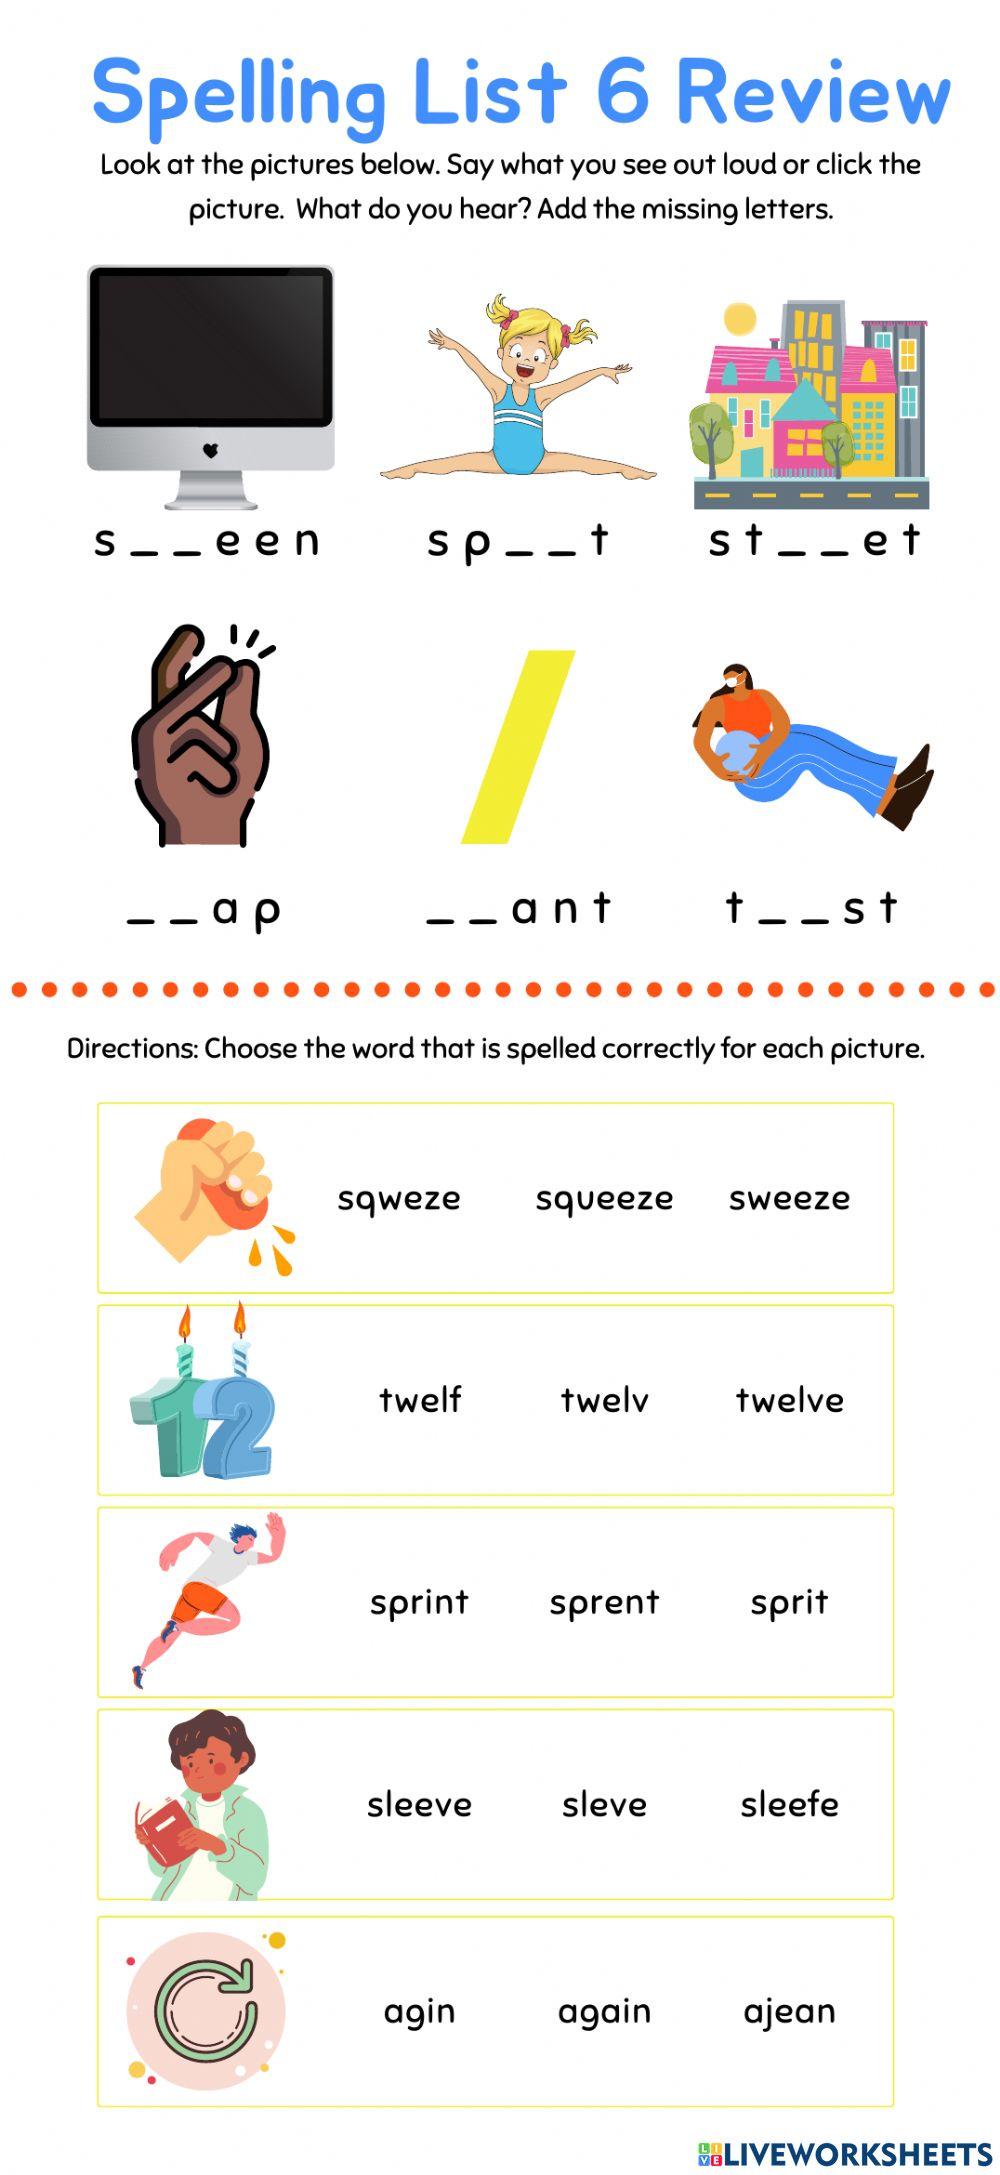 Spelling List 6 Review